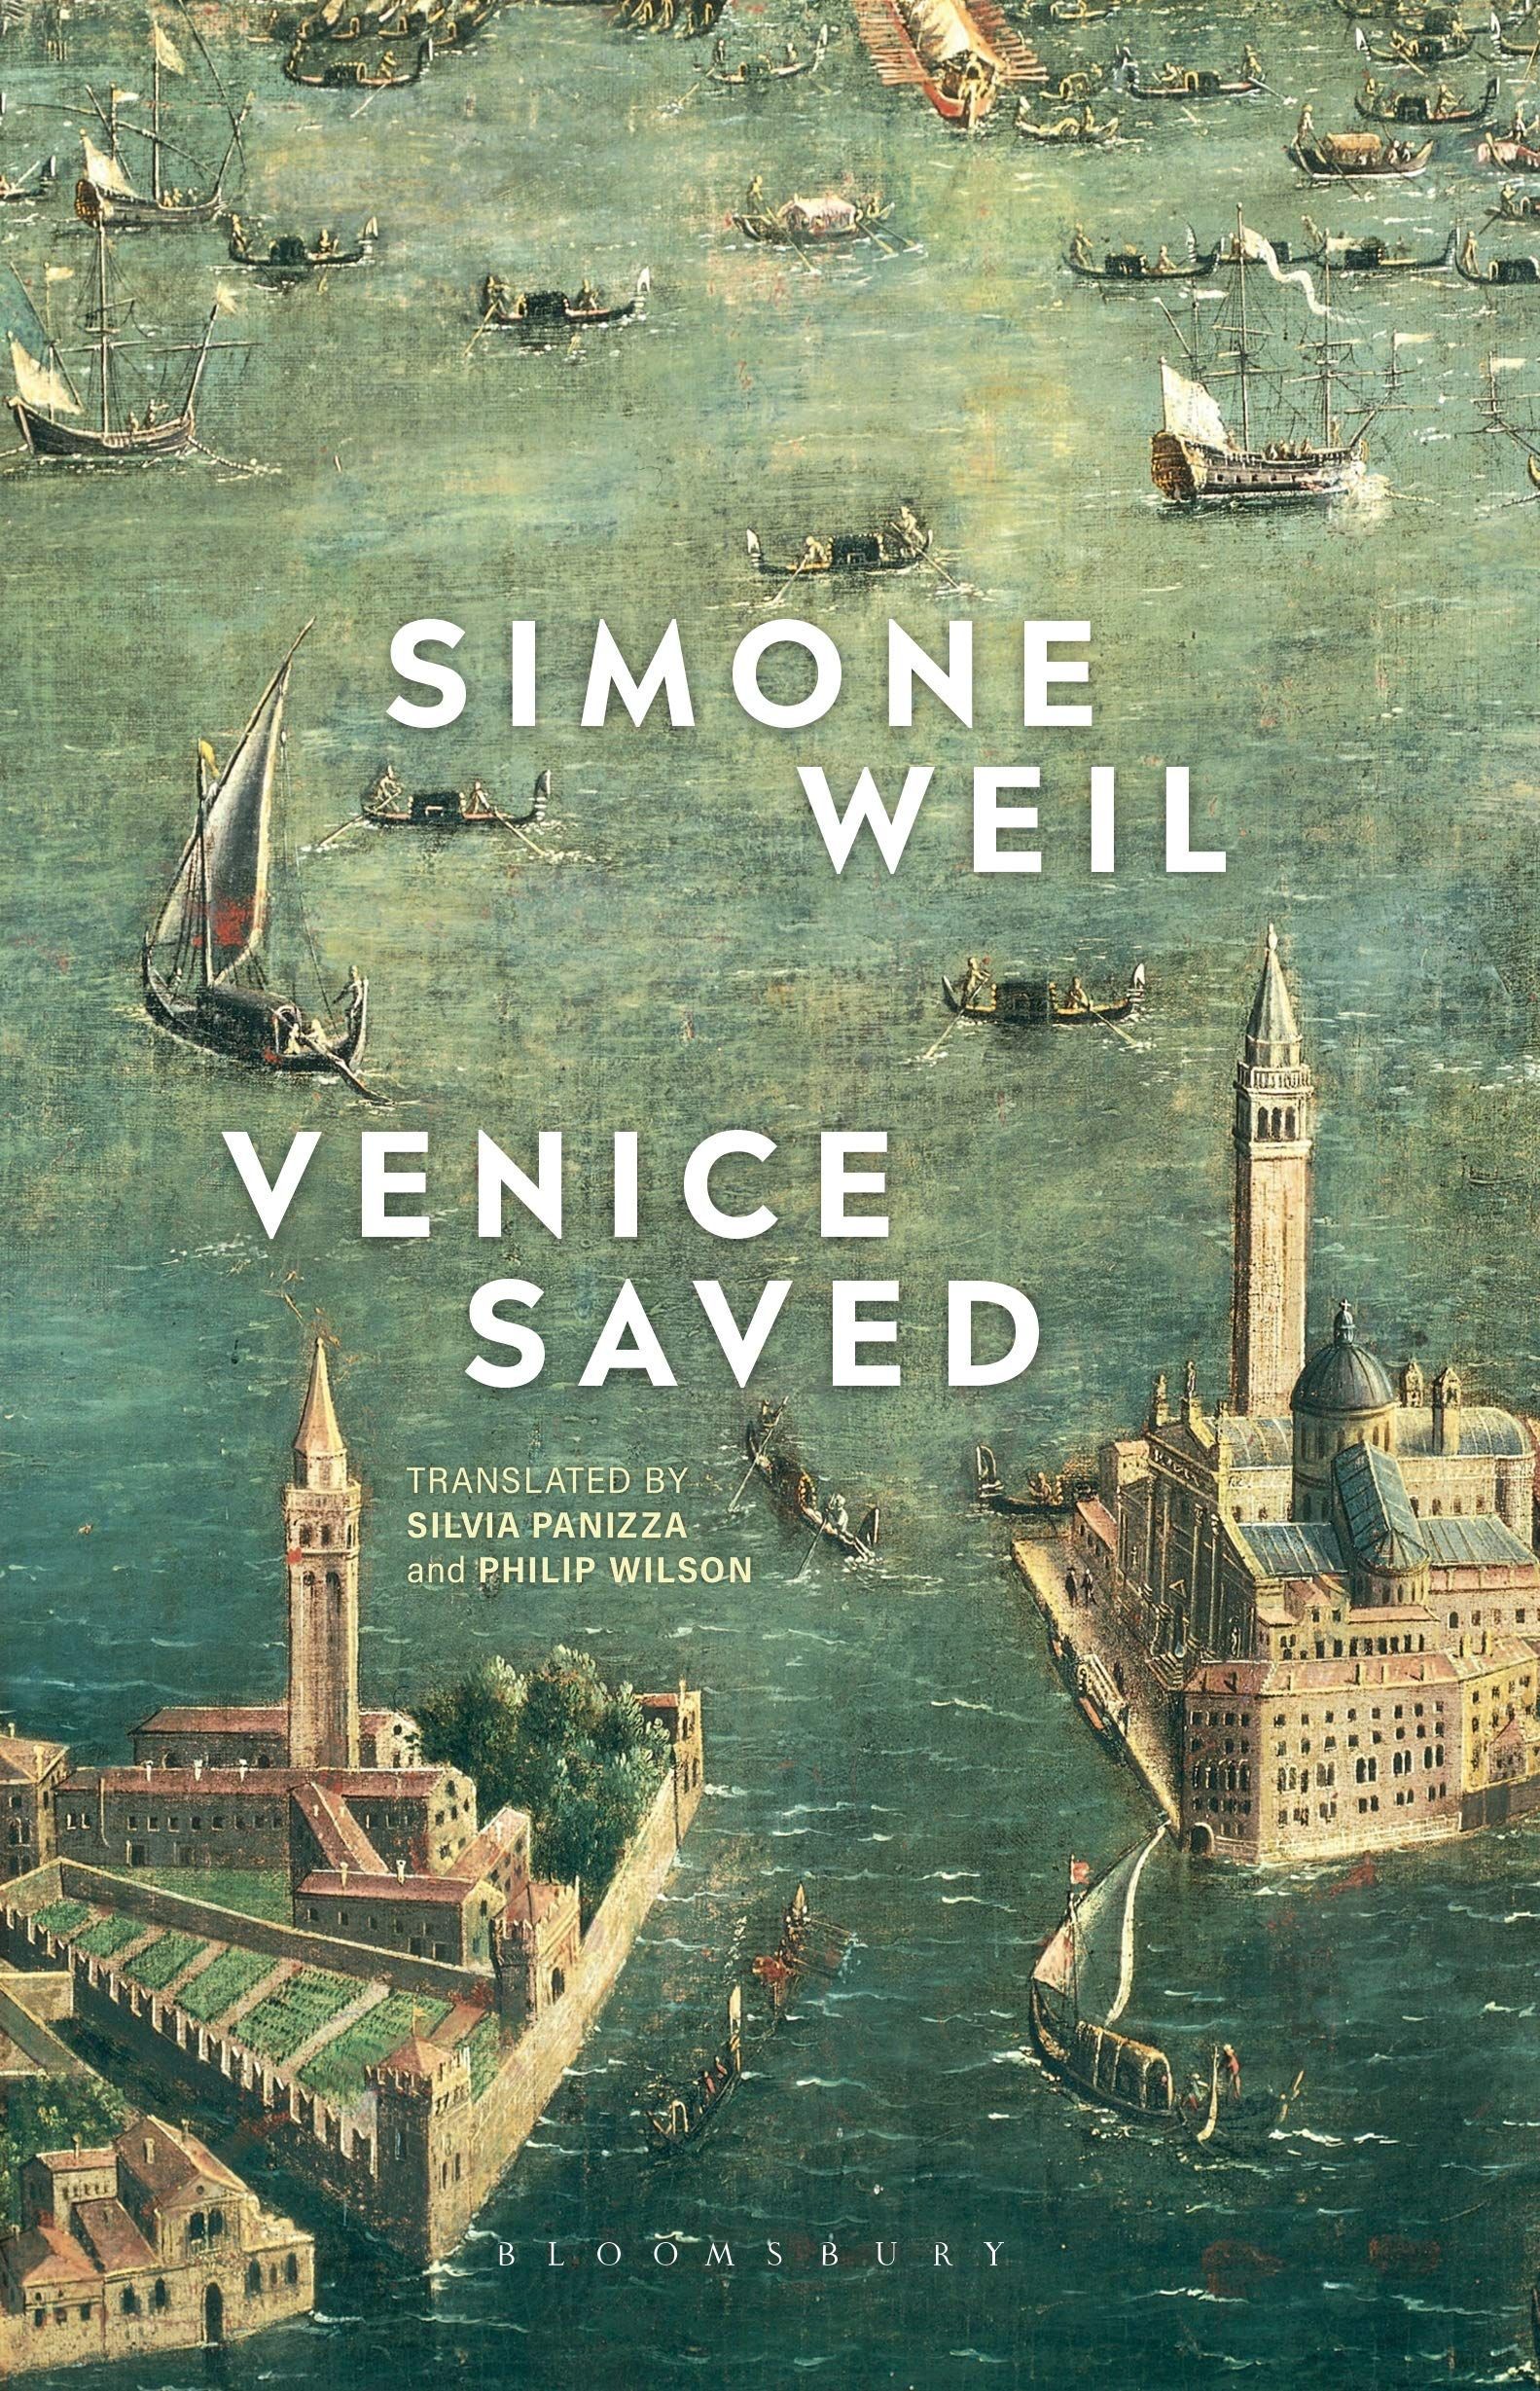 The Play’s the Thing: On Simone Weil’s “Venice Saved”